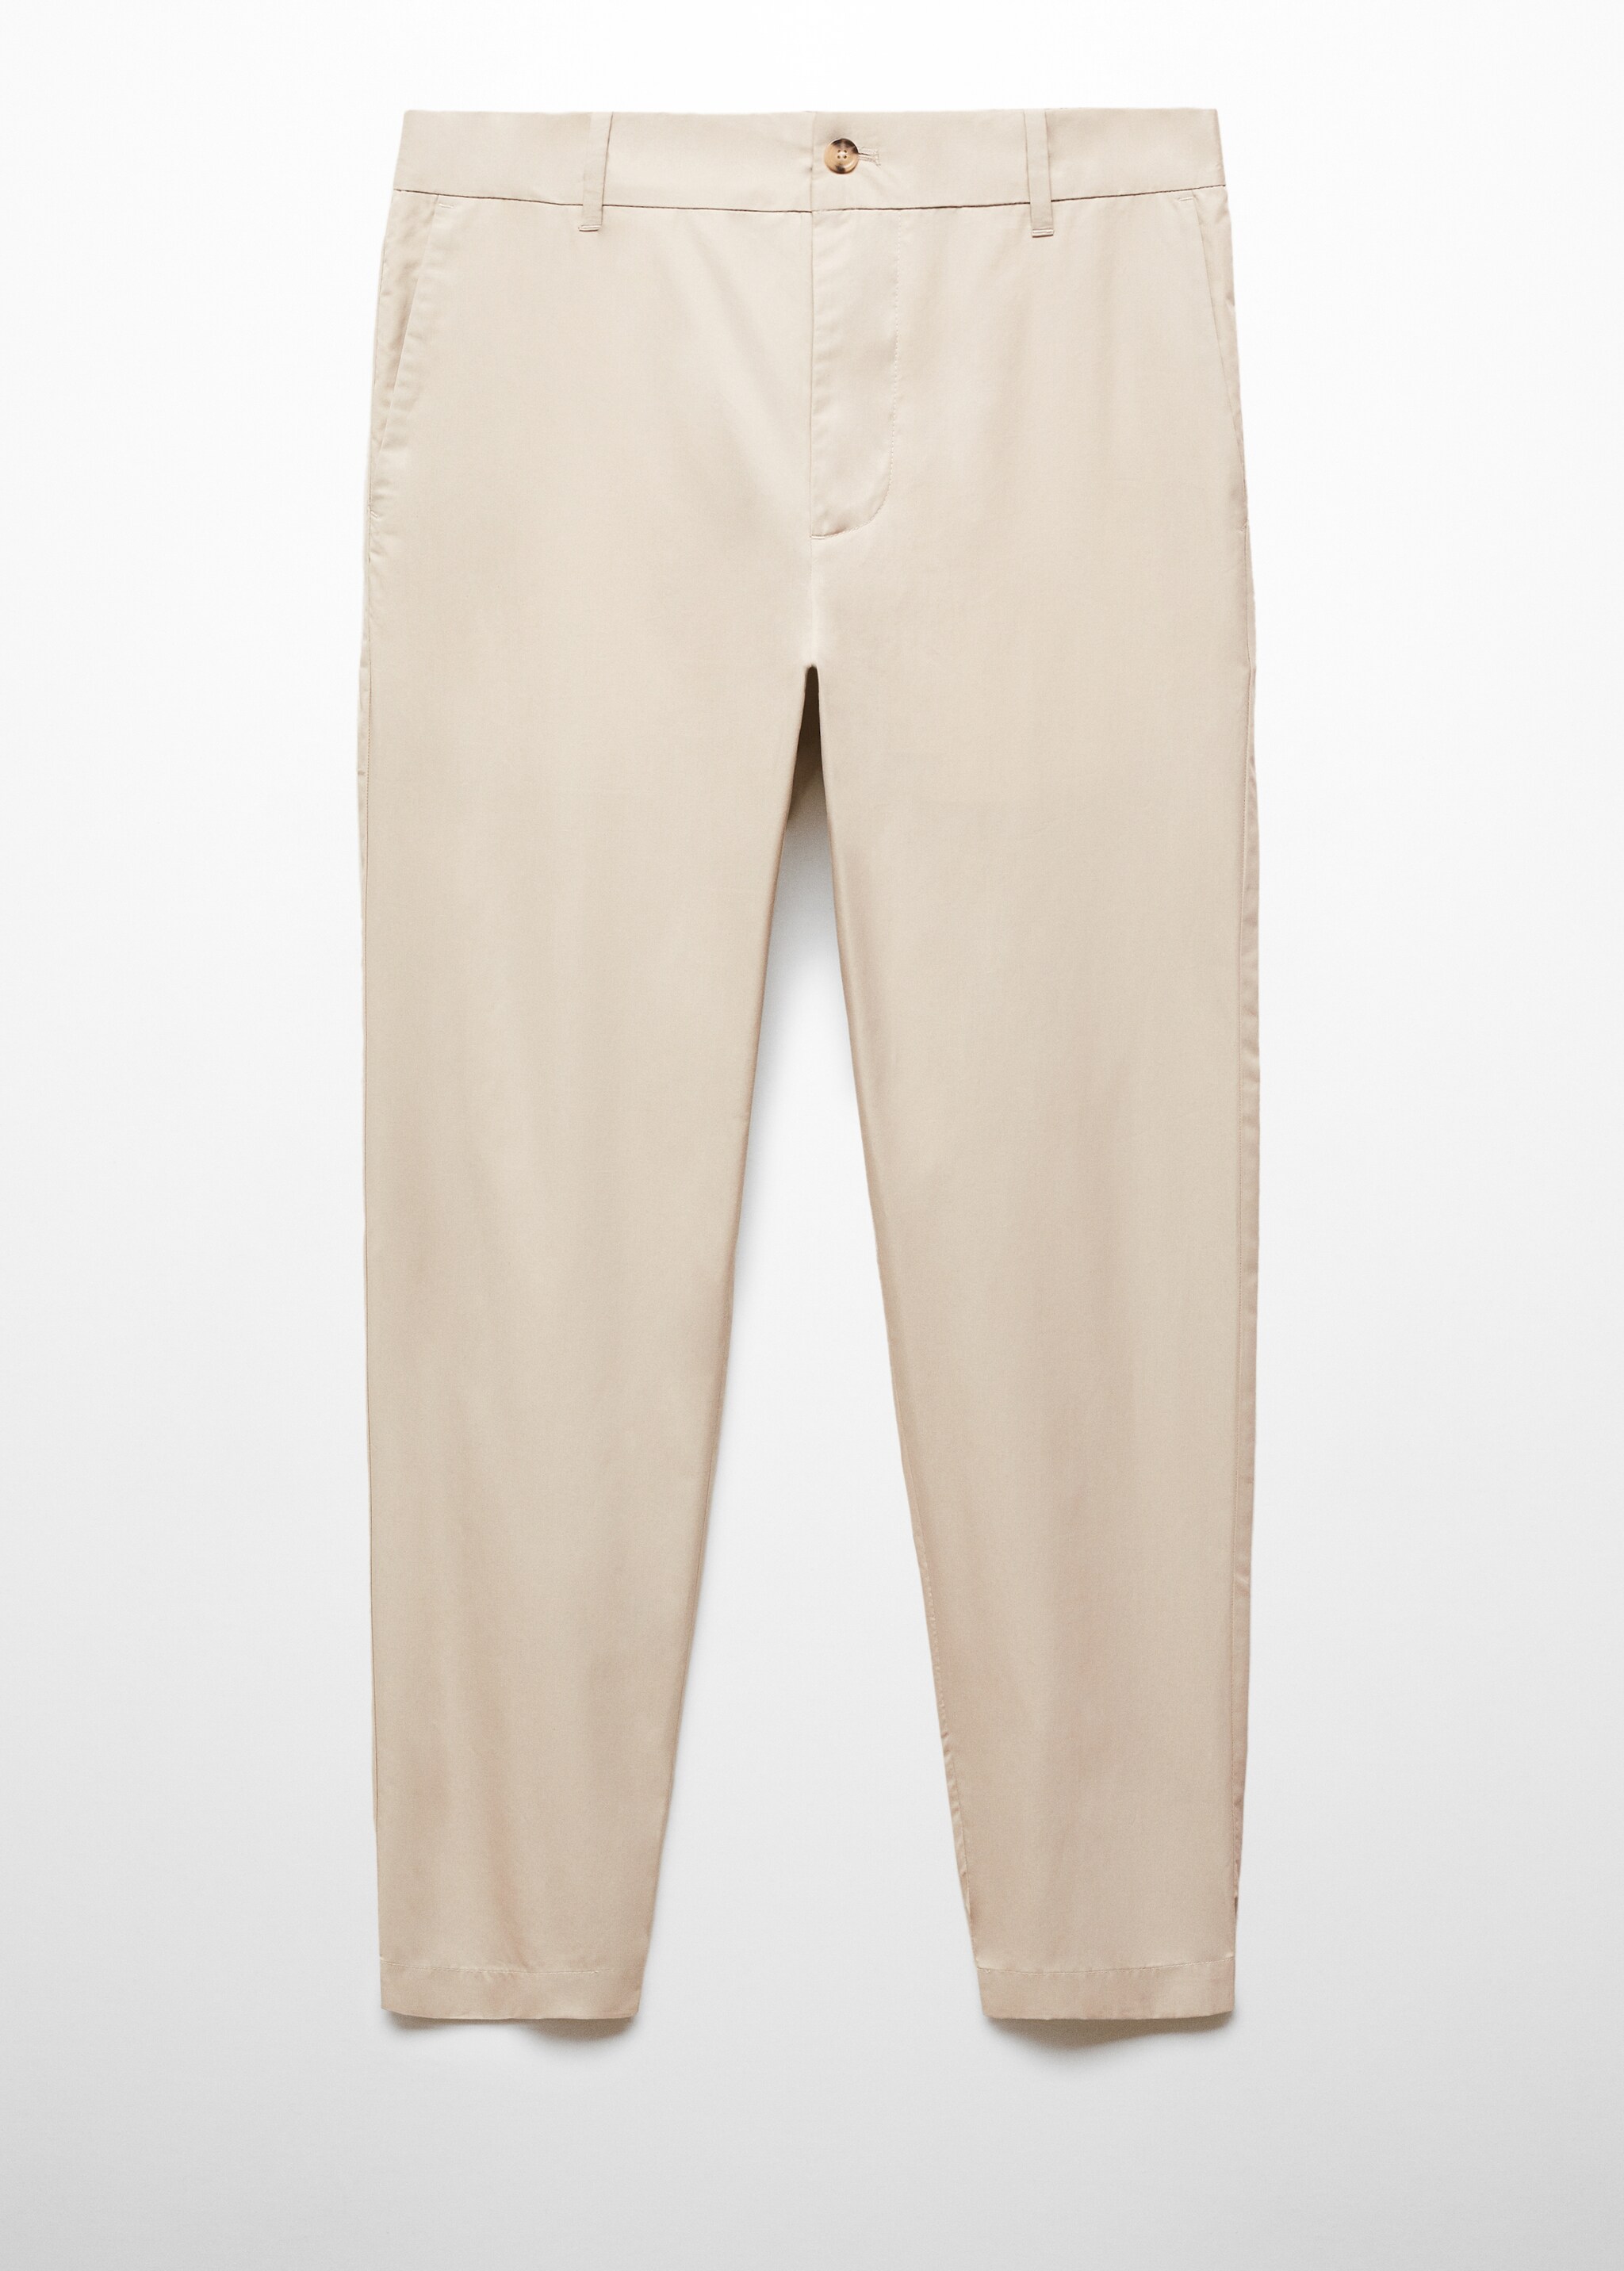 100% slim-fit cotton trousers - Article without model